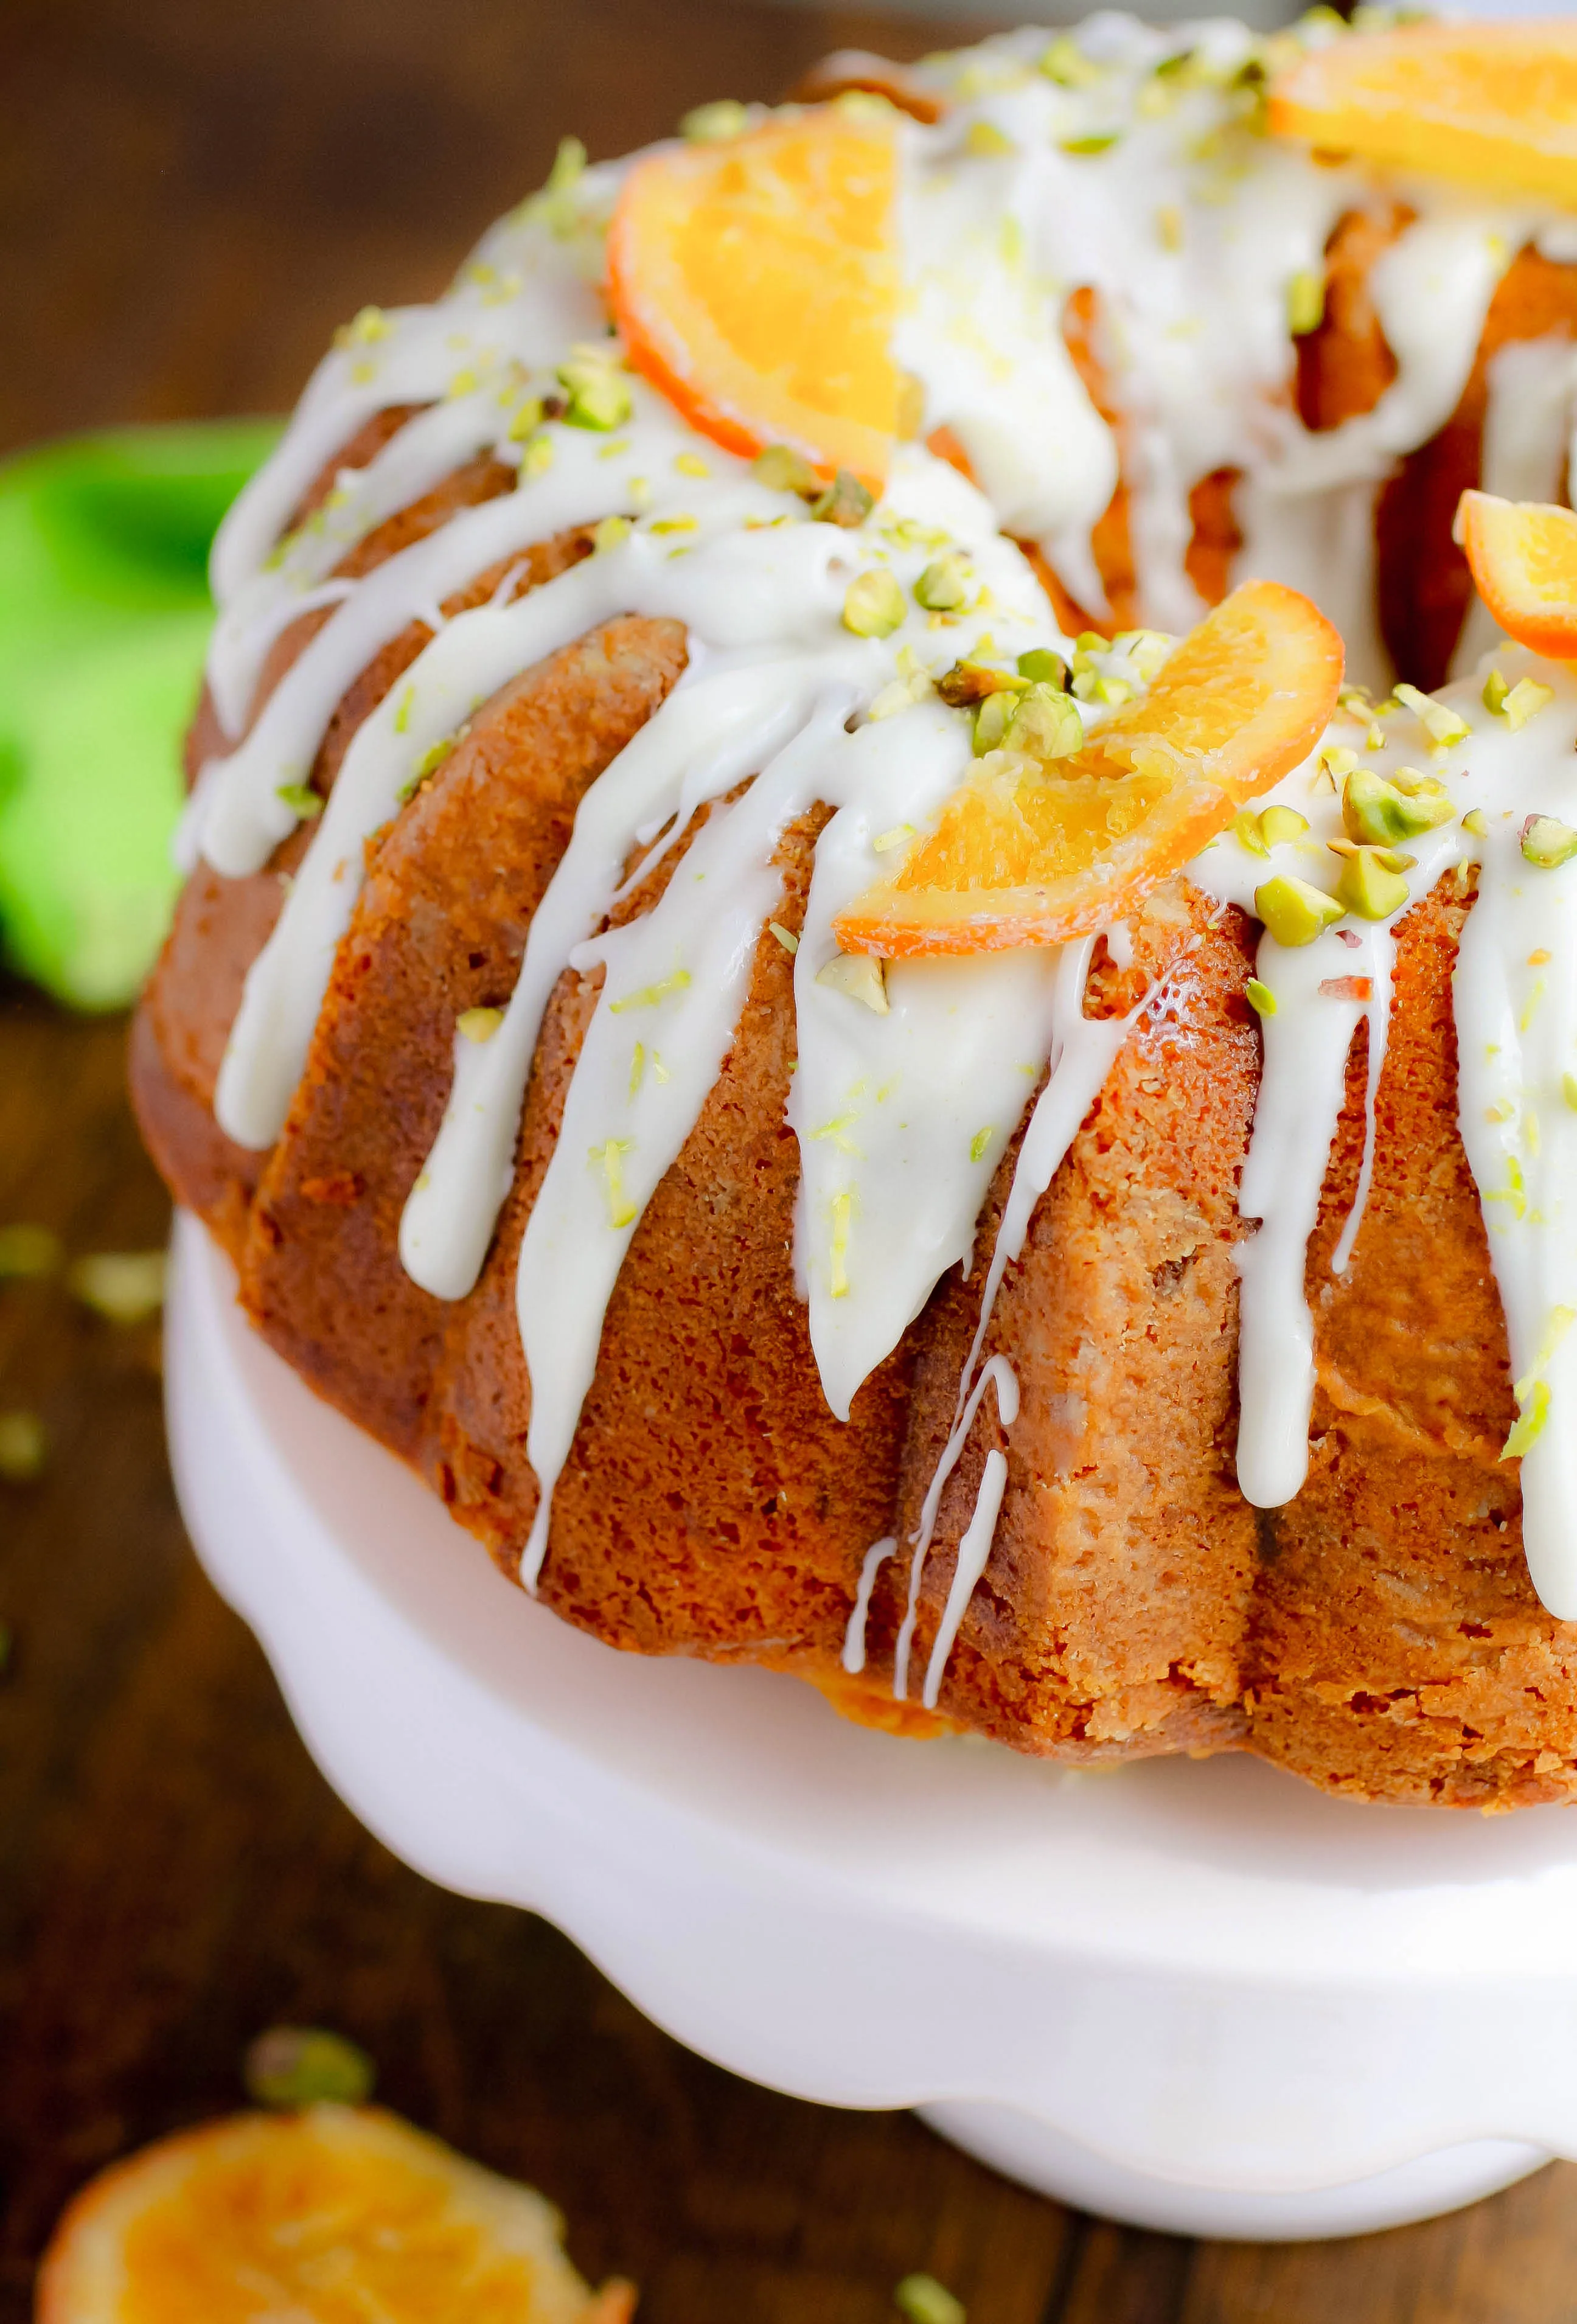 Orange Marmalade-Pistachio Bundt Cake is a show-stopping dessert! You'll love how pretty and delicious this Orange Marmalade-Pistachio Bundt Cake is! 